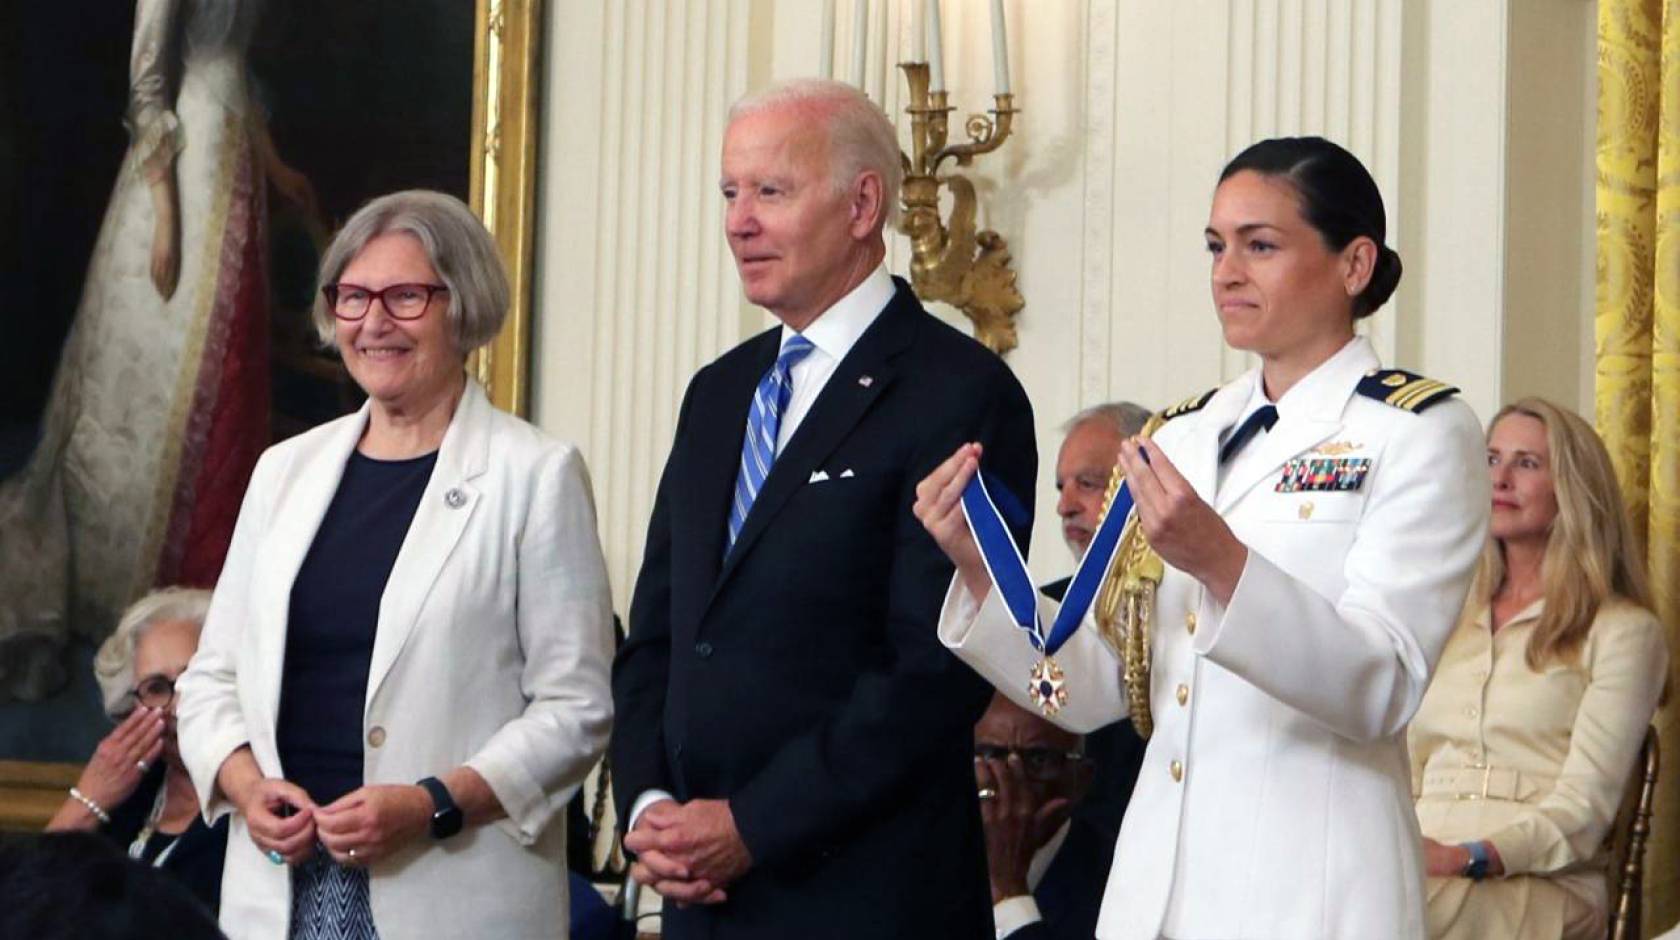 Sister Simone, President Biden and a woman in a Navy officer holding the Presidential Medal of Freedom